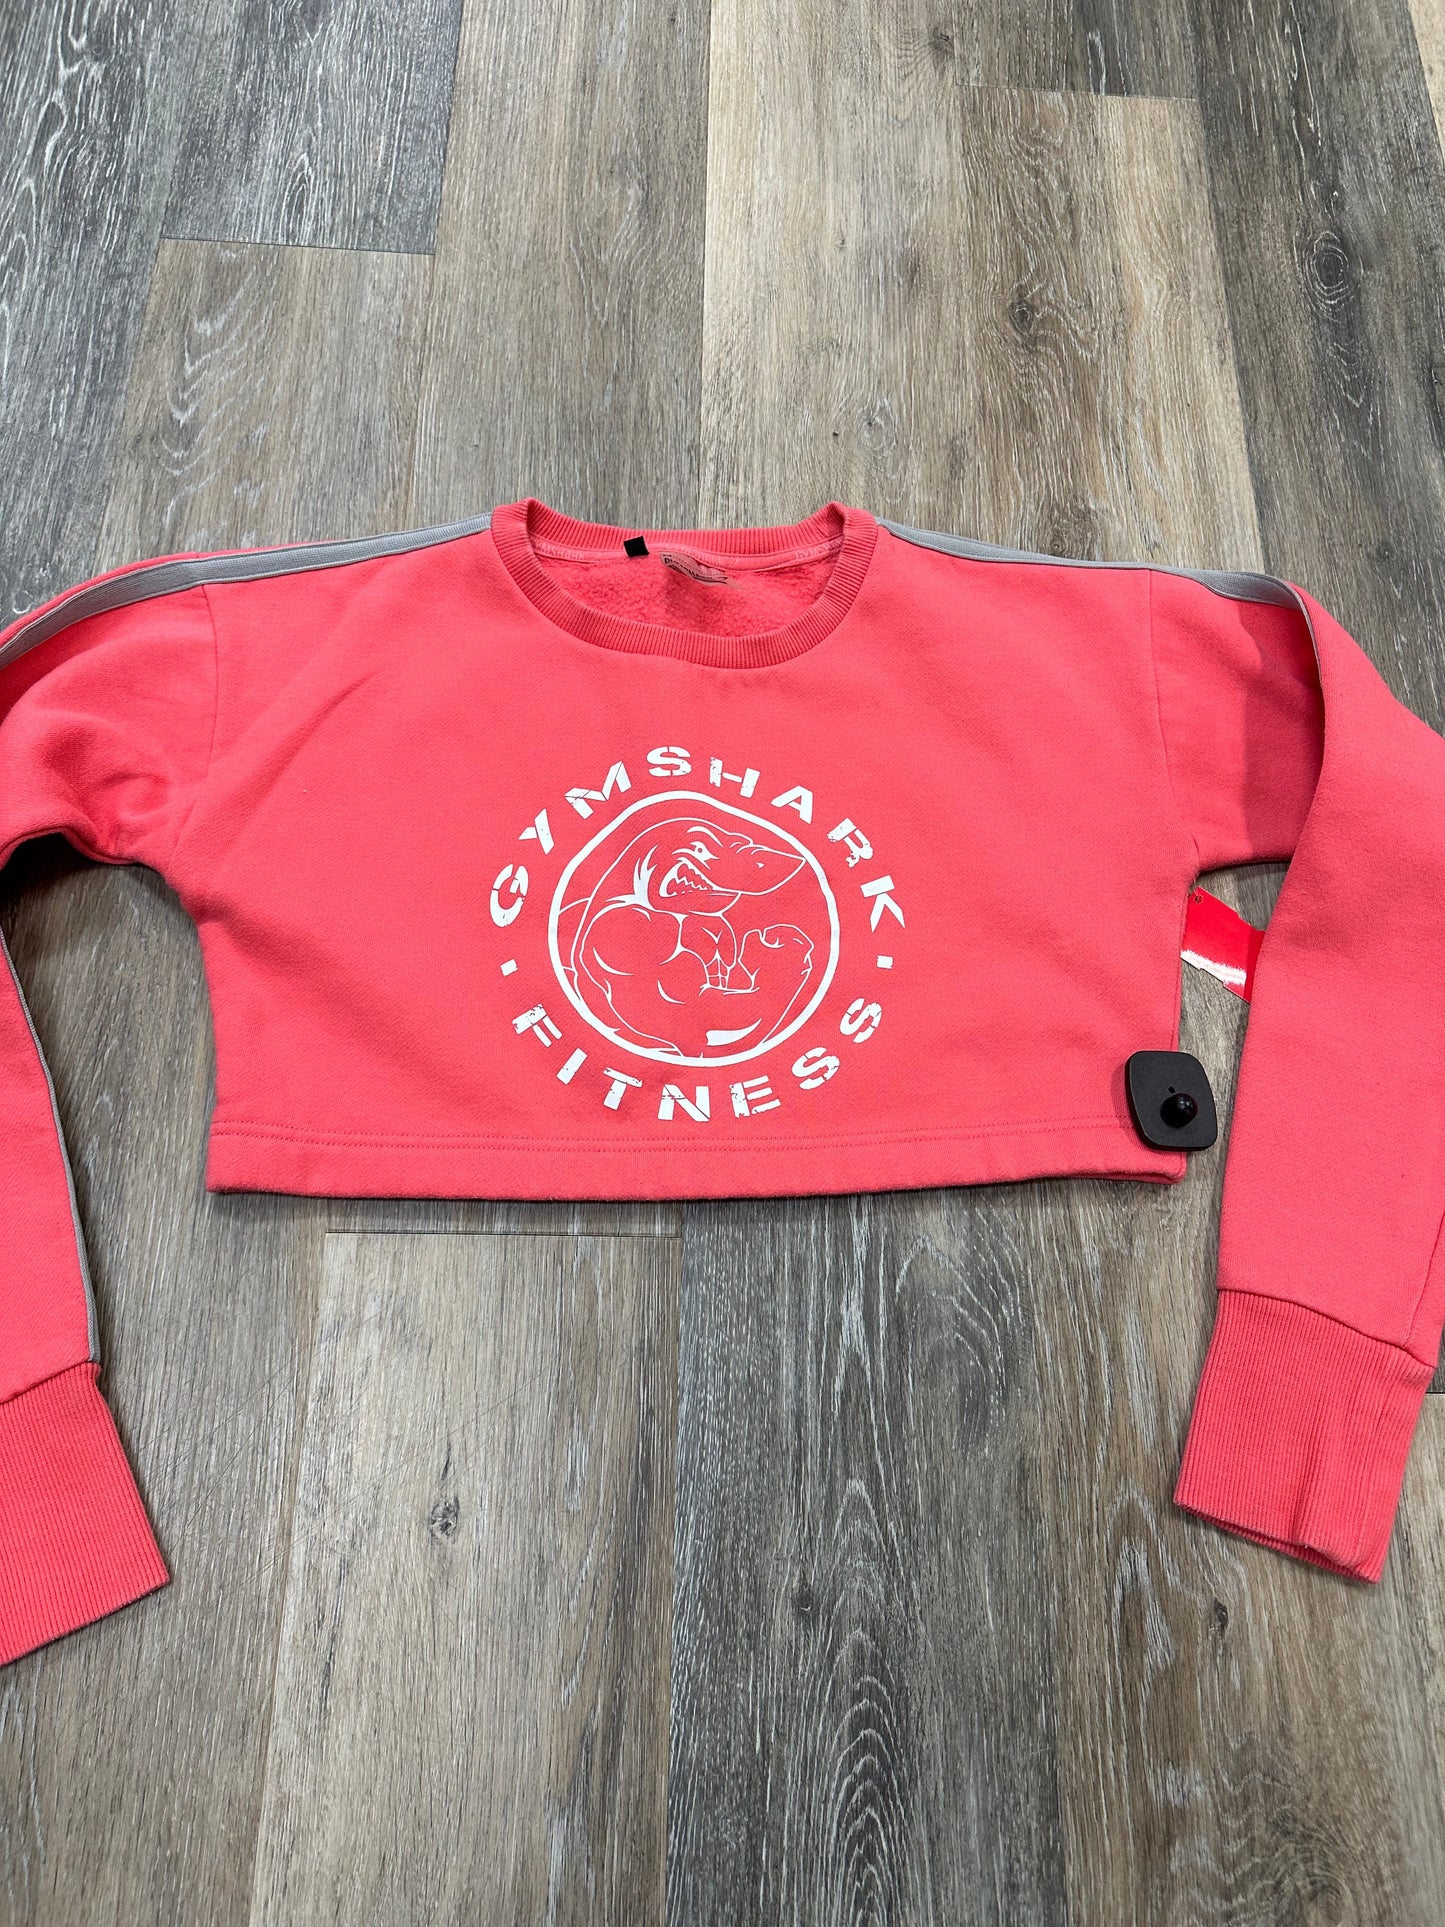 Athletic Top Long Sleeve Collar By Gym Shark  Size: Xs